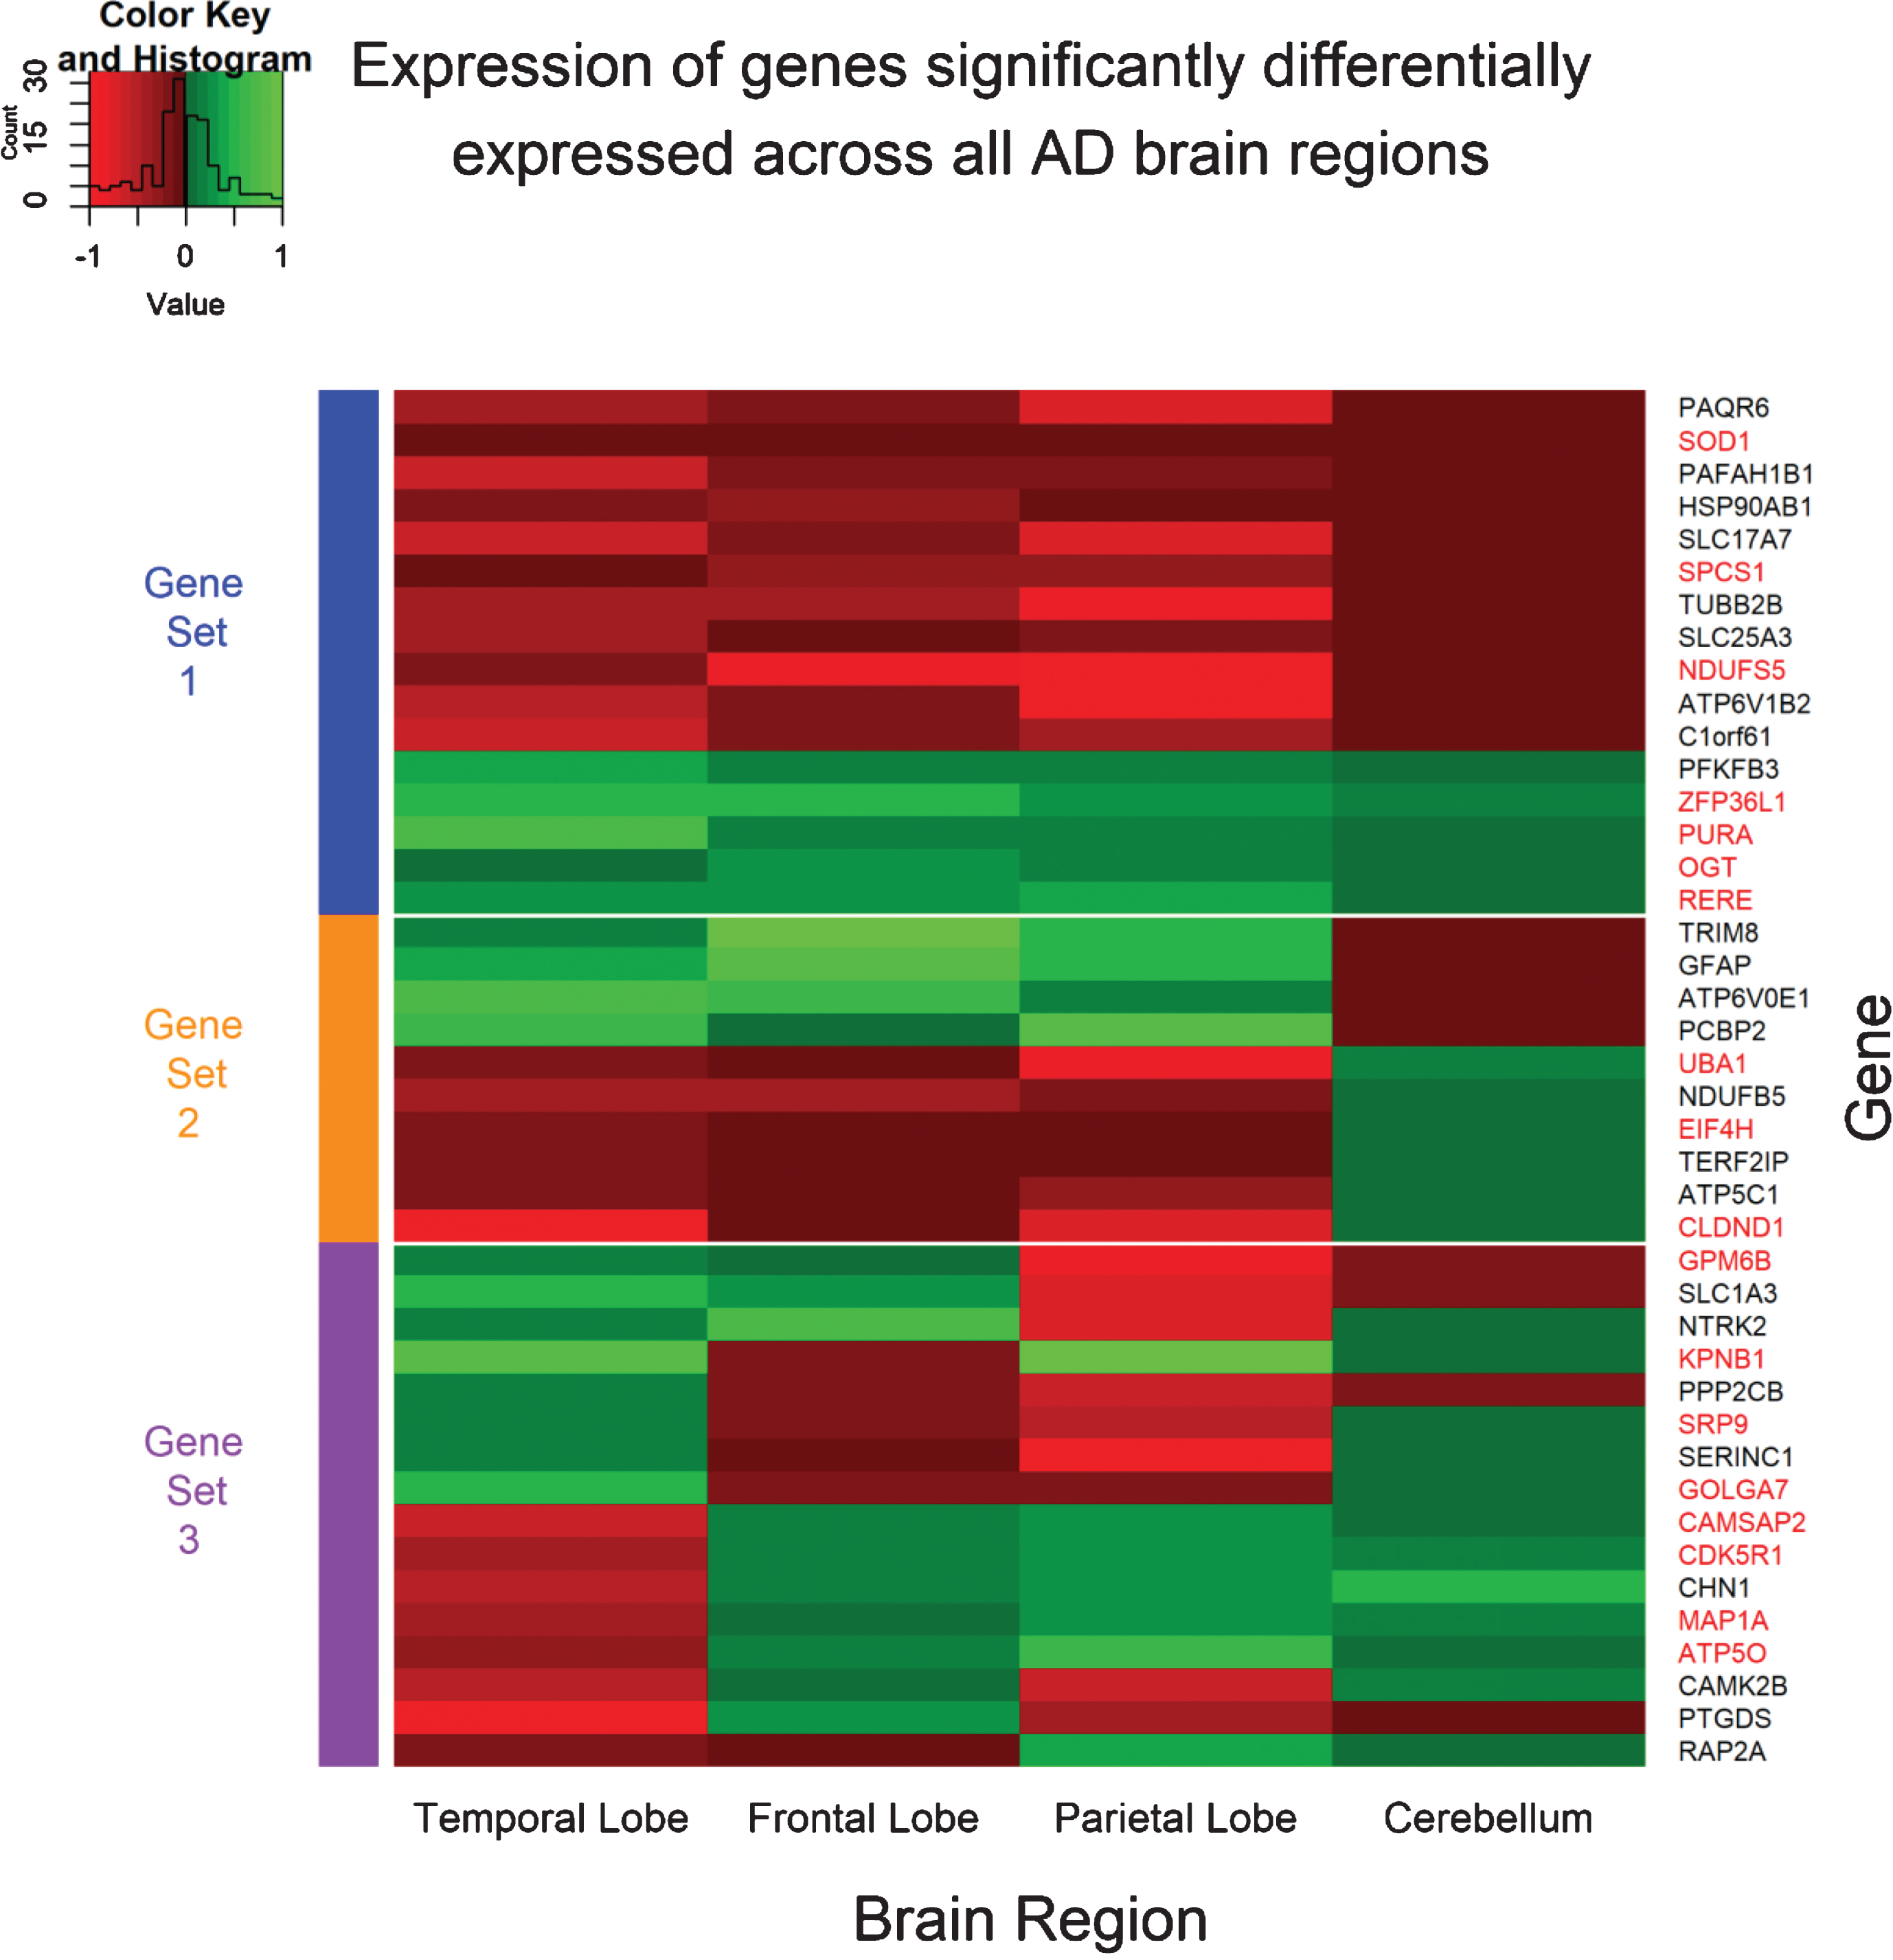 Expression pattern of genes significantly differentially expressed across all four AD brain regions. The expression values for each gene was obtained from the meta-summary calculations. Red cells represent downregulated genes, and green cells represent upregulated genes. Forty-two genes were observed to be significantly perturbed across all four AD brain regions and can be grouped into three “sets”. Gene set 1 represents genes which are perturbed consistently in the same direction across all AD brain regions and can be considered disease-specific. Gene set 2 represents genes consistent in expression in the temporal lobe, frontal lobe, and parietal lobe brain regions, but reversed in the cerebellum brain region; a region often referred to be free from AD pathology. Finally, Gene set 3 represents genes which are significant DE across all four brain regions, however, directional change is not consistent across the brain regions and may represent tissue-specific genes or even false positive. The gene names highlighted in red are genes perturbed in AD and not in any other disorder used in this study and are deemed “AD-specific”.